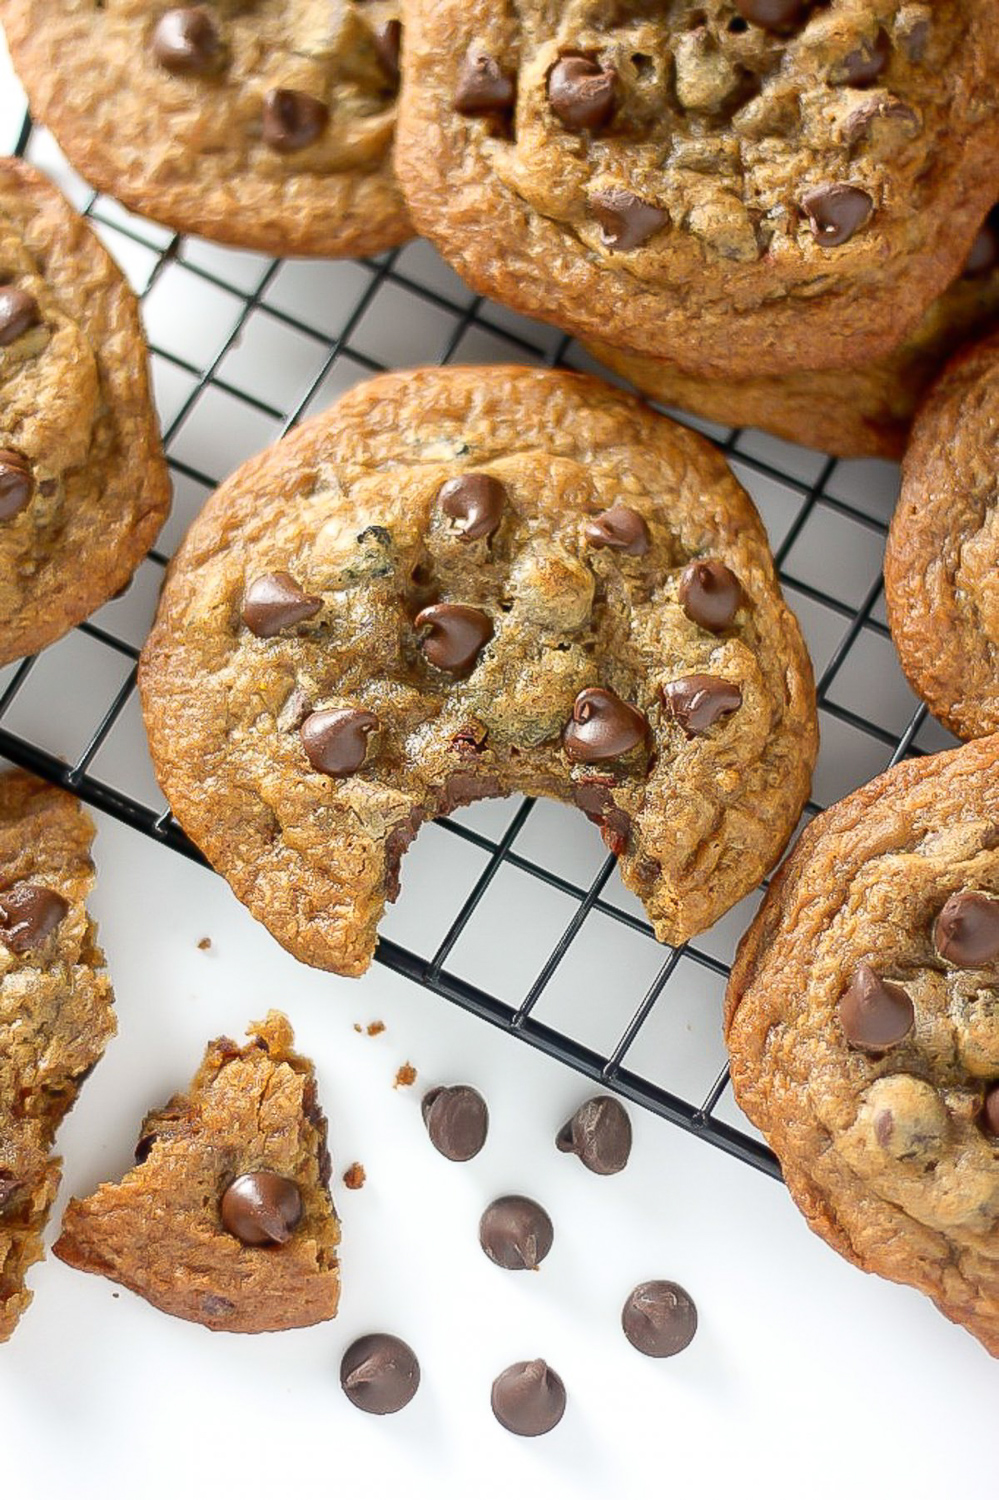 Craving chocolate chip cookies? Well, you're in the right place! Today I'm sharing 21 chocolate chip cookie recipes sure to cure ANY craving! Seriously! So whether you're looking for mini chocolate chip cookies, vegan chocolate chip cookies, or monster chocolate chip cookies loaded with m&ms and chewy oats, I've got you covered! 